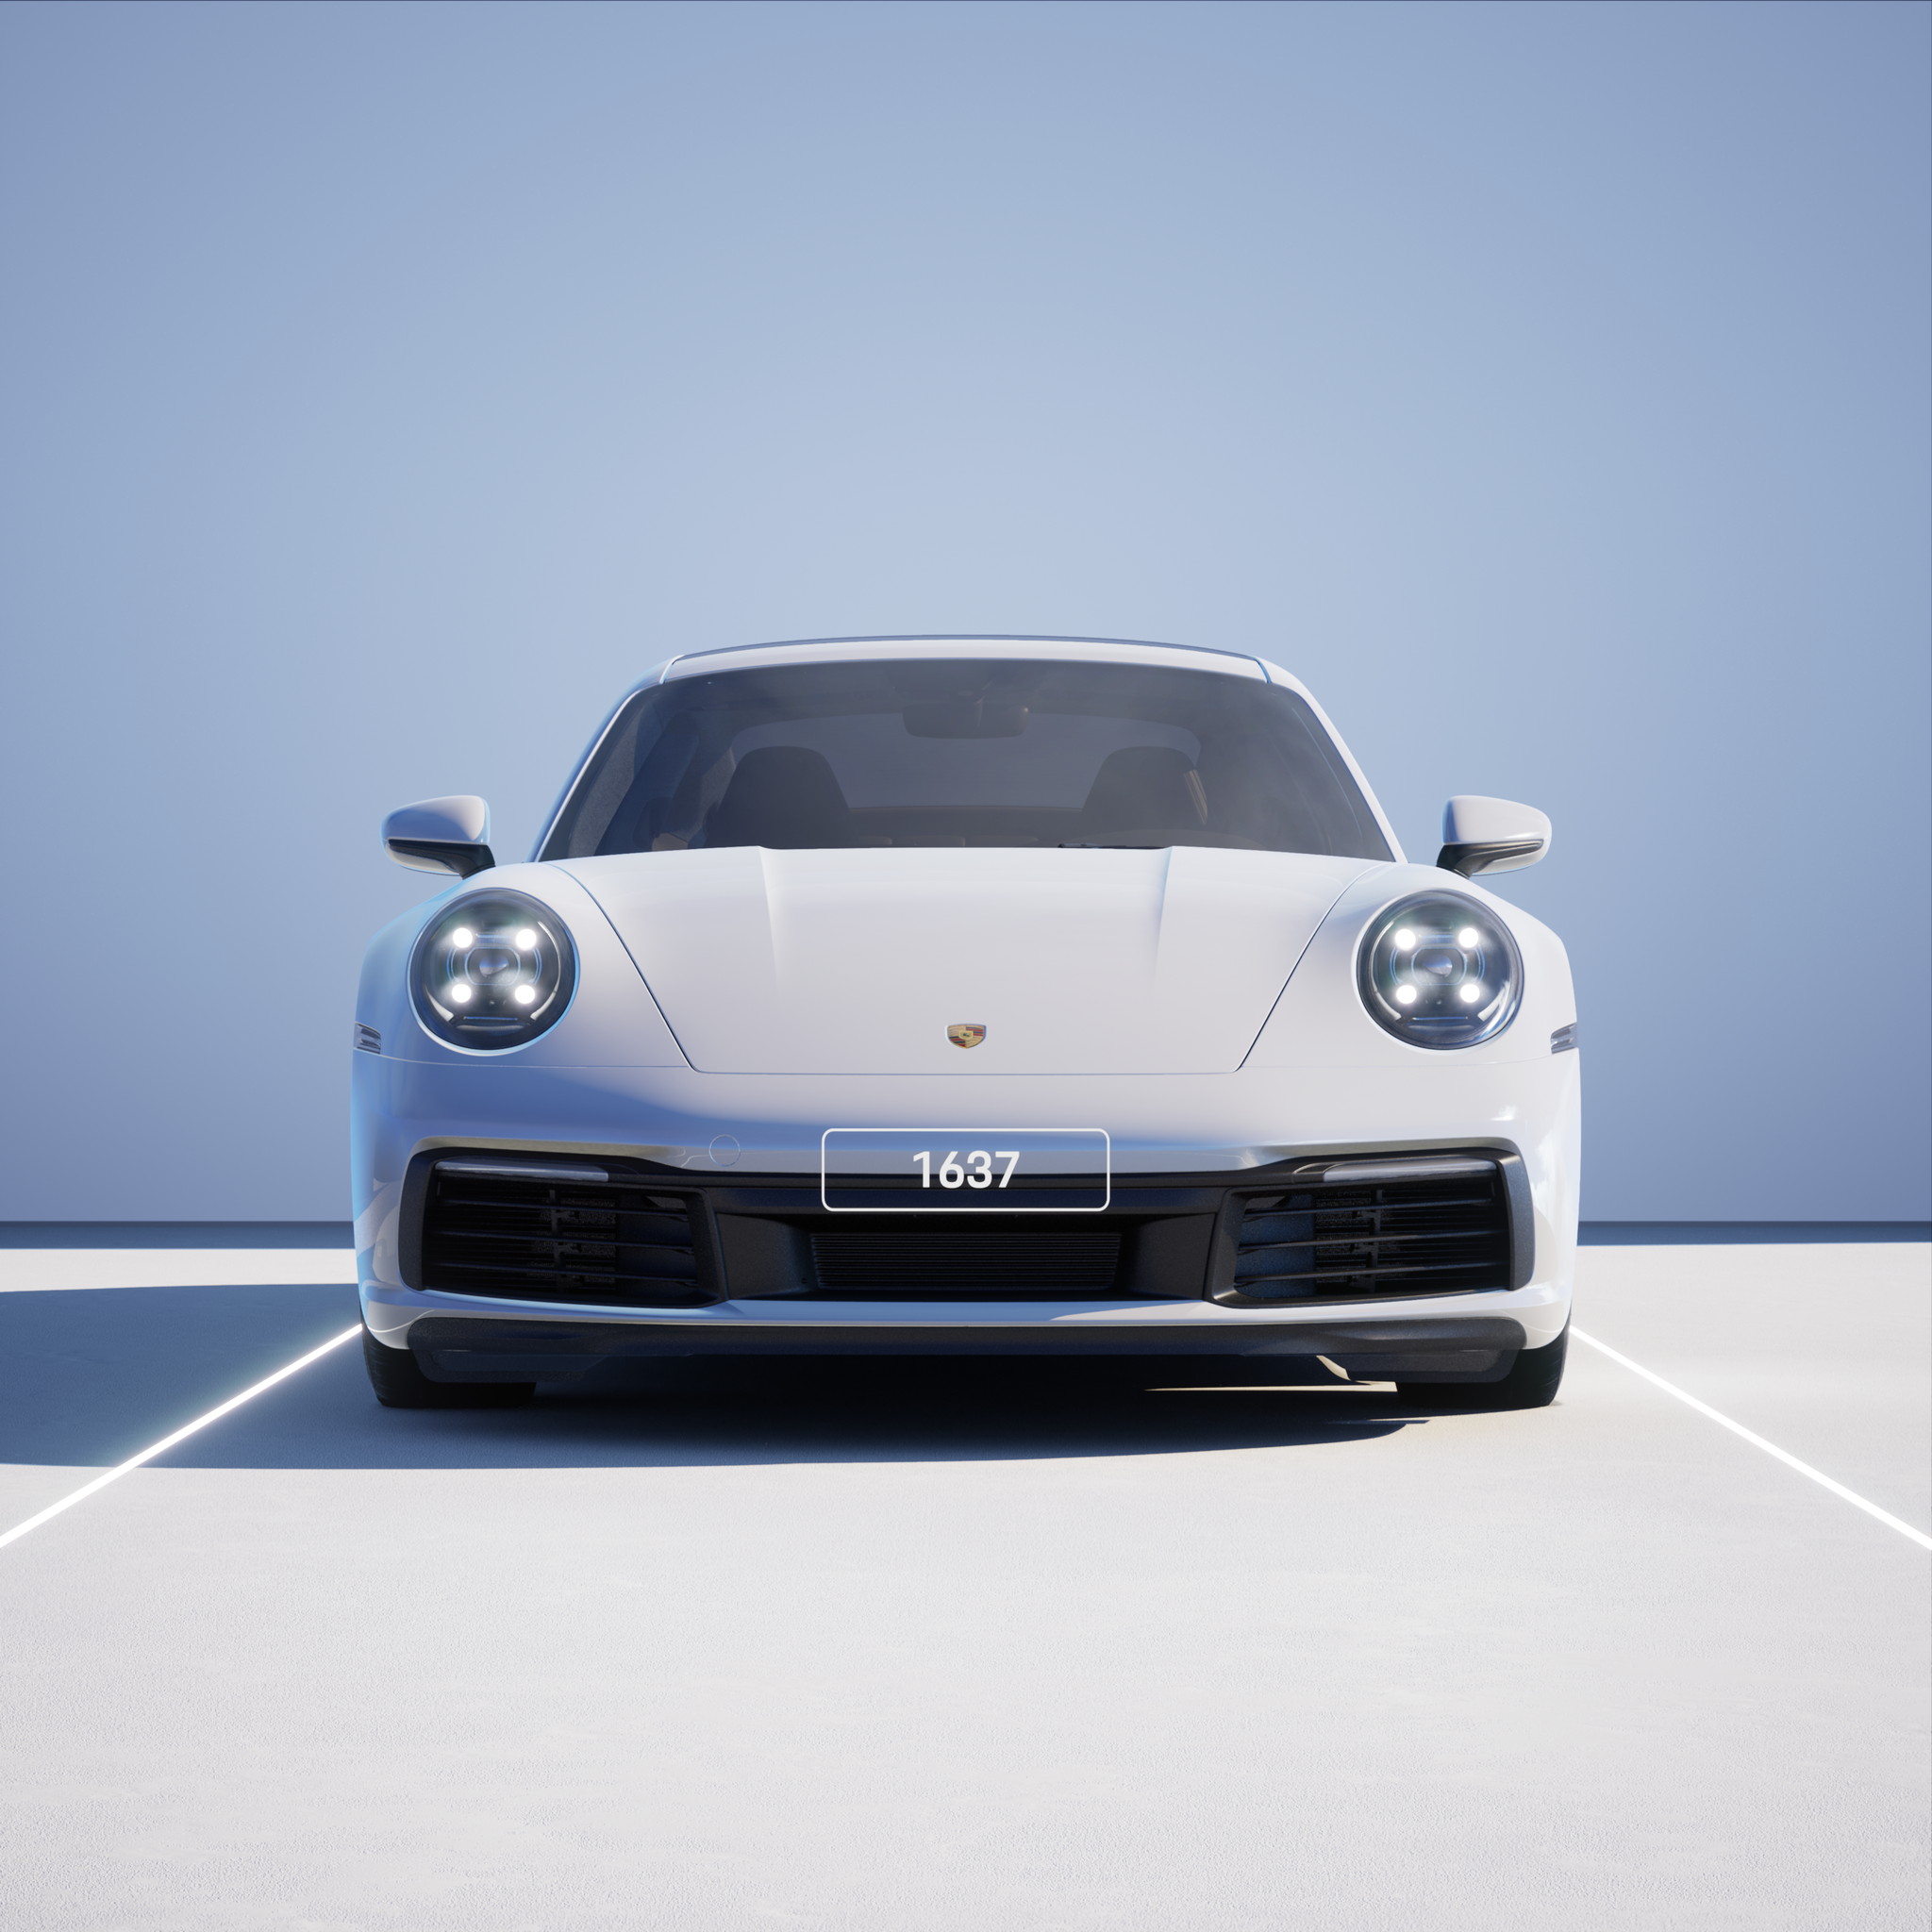 The PORSCHΞ 911 1637 image in phase